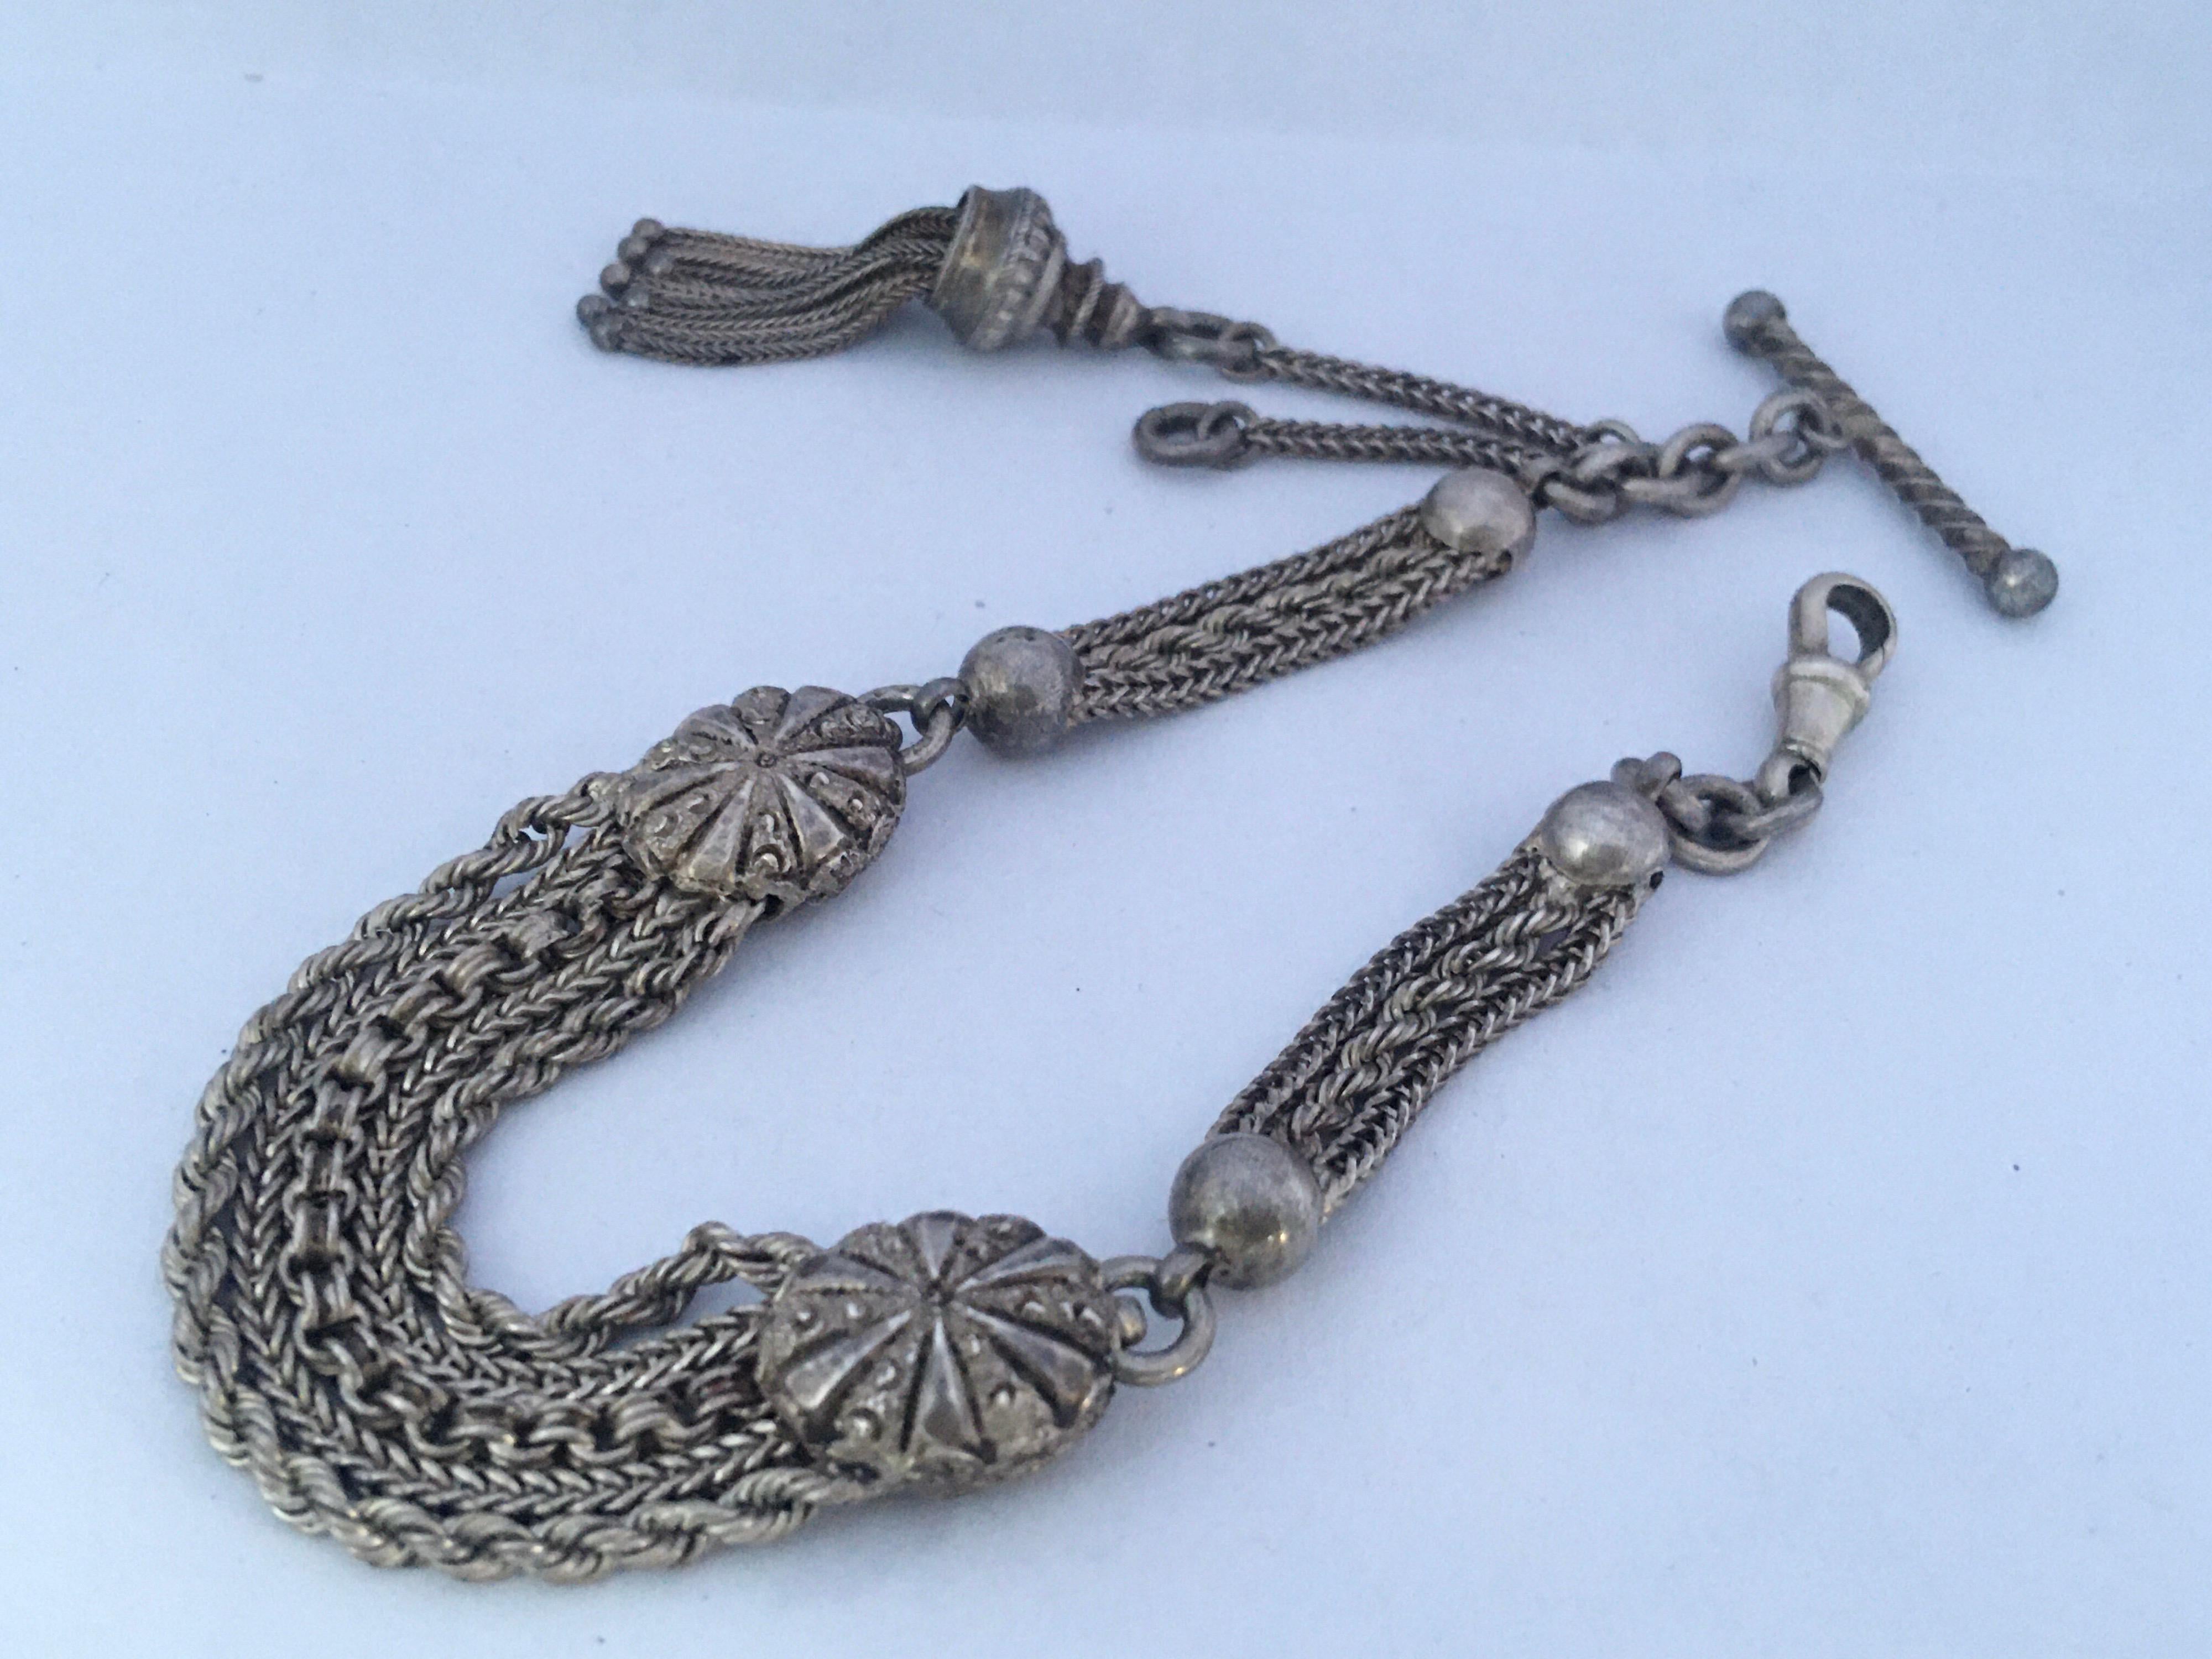 This beautiful antique pocket watch chain is in good condition. Please study the images carefully as form part of the description. 